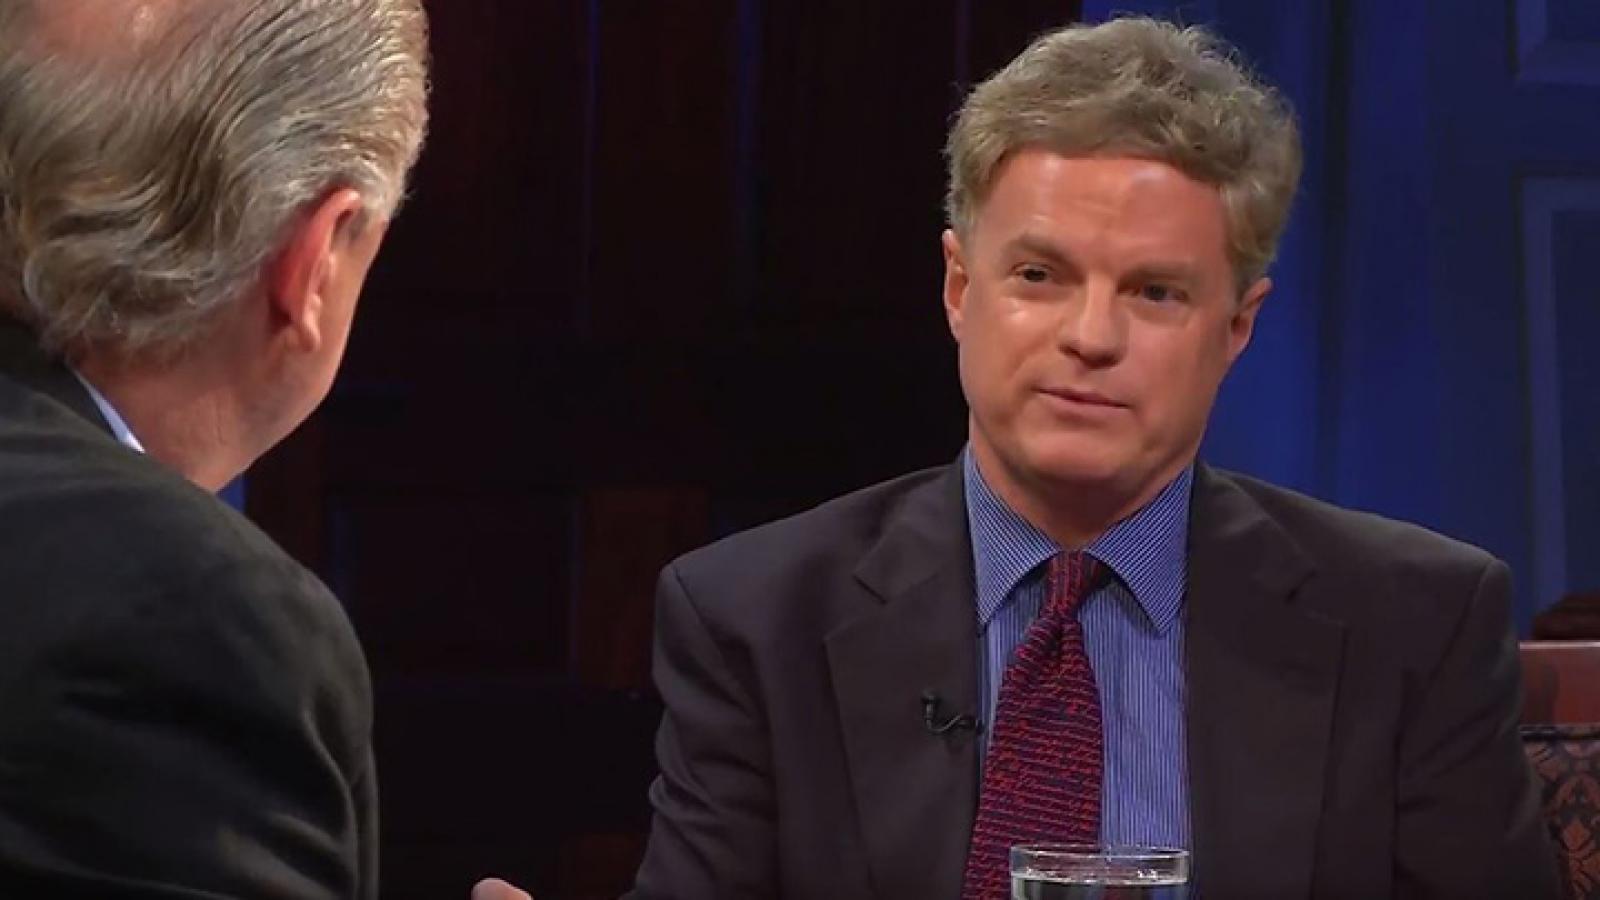 Former domestic policy advisors John Bridgeland and Melody Barnes on how government can be limited but still solve problems